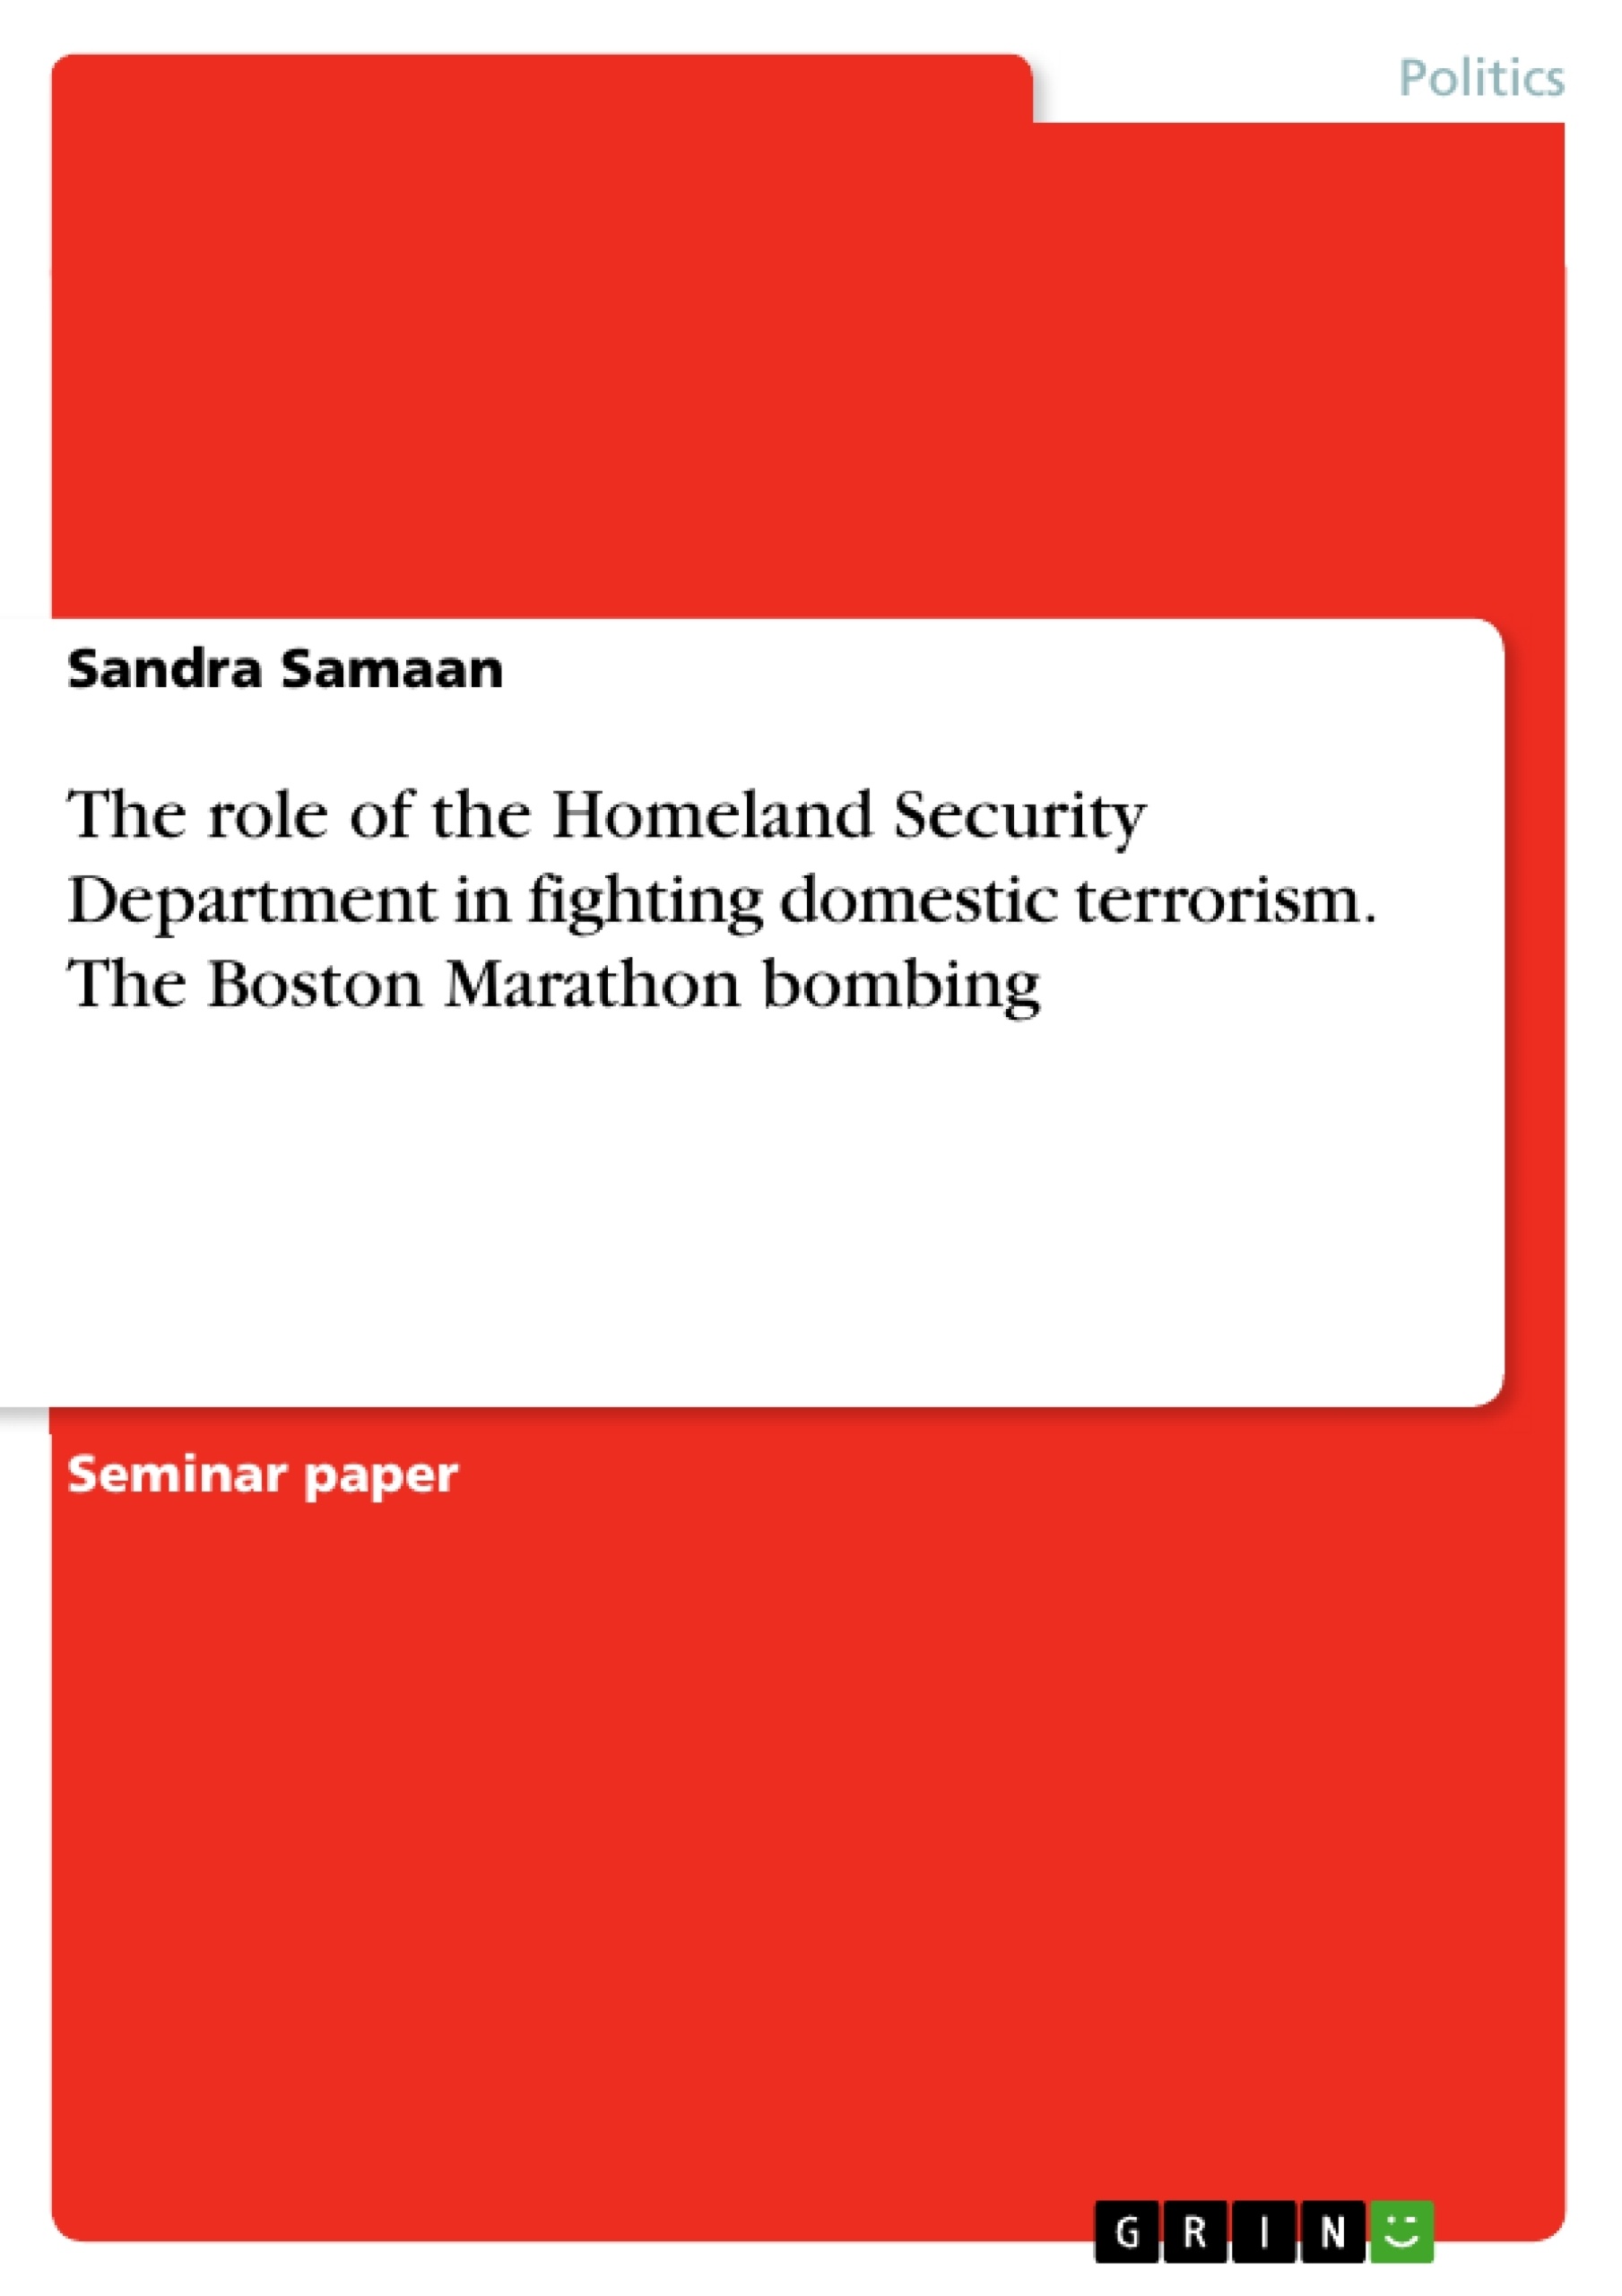 Title: The role of the Homeland Security Department in fighting domestic terrorism. The Boston Marathon bombing